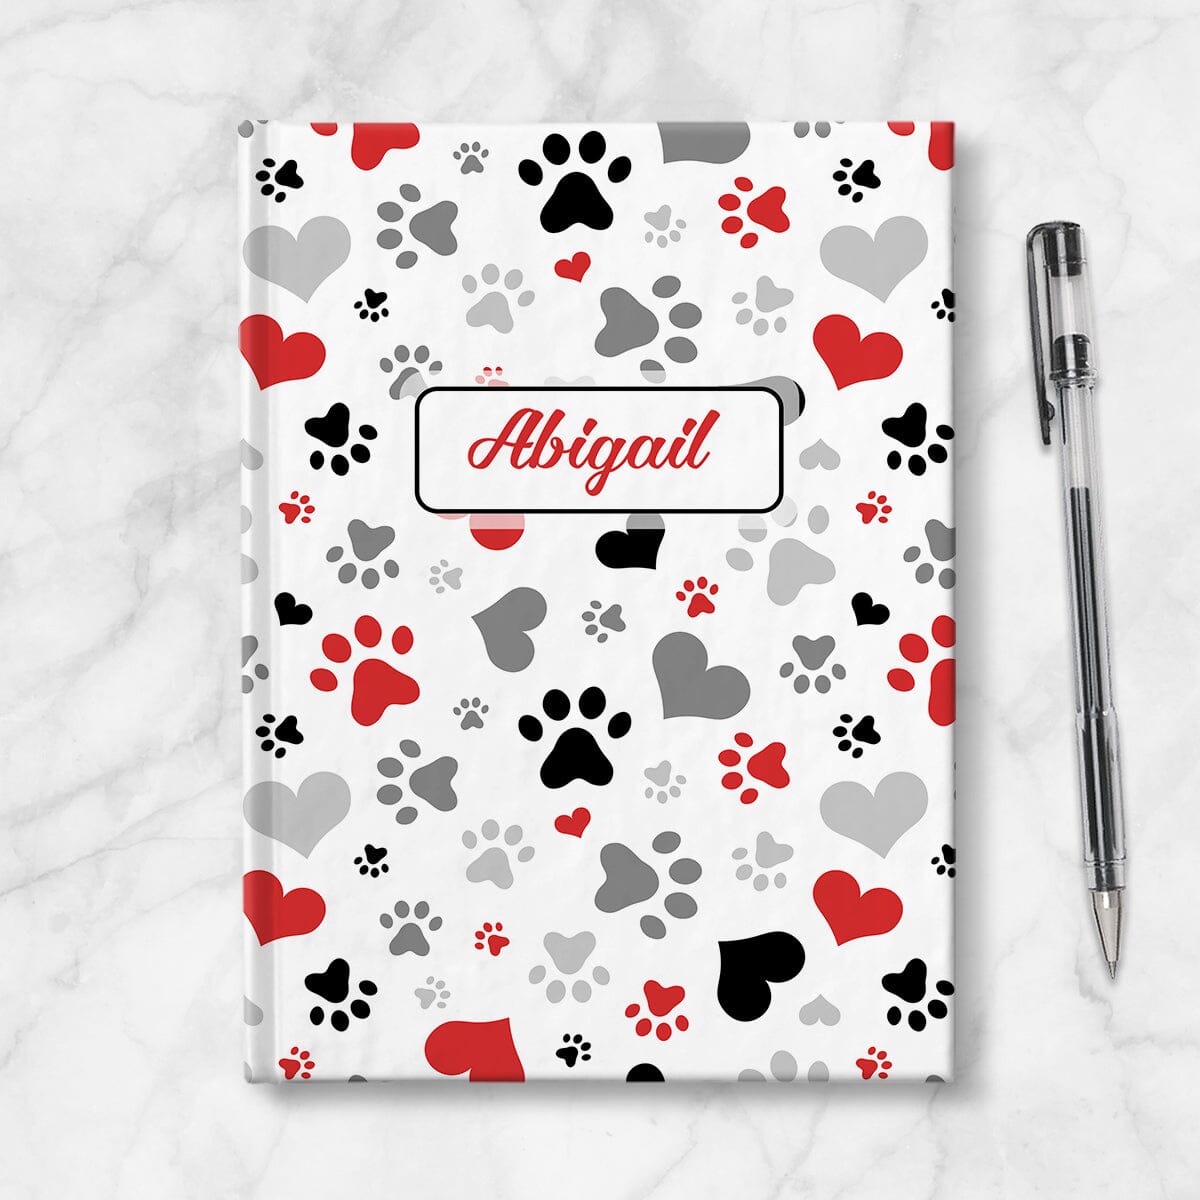 Personalized Black Red Hearts and Paw Prints Journal at Artistically Invited. Front side of journal on table with a pen next to it.